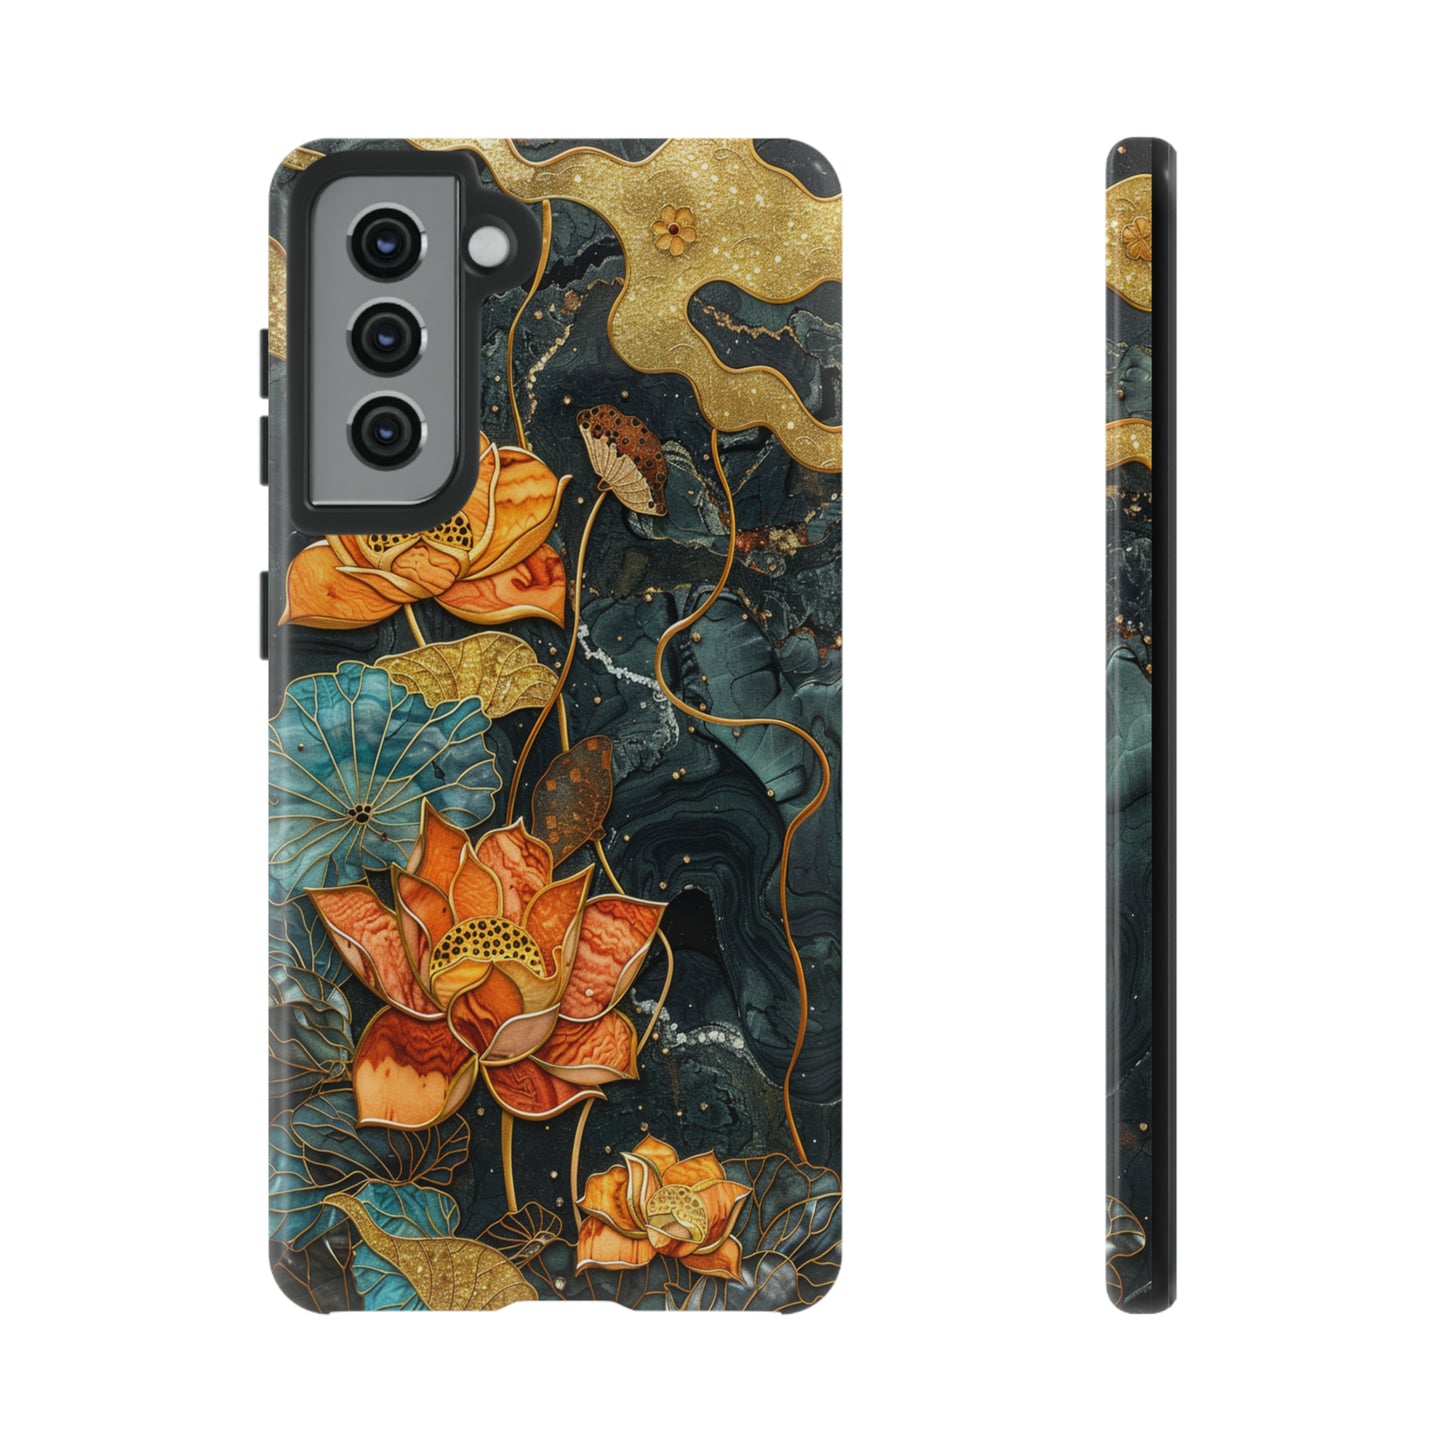 Chiyogami Floral Scroll Work Phone Case